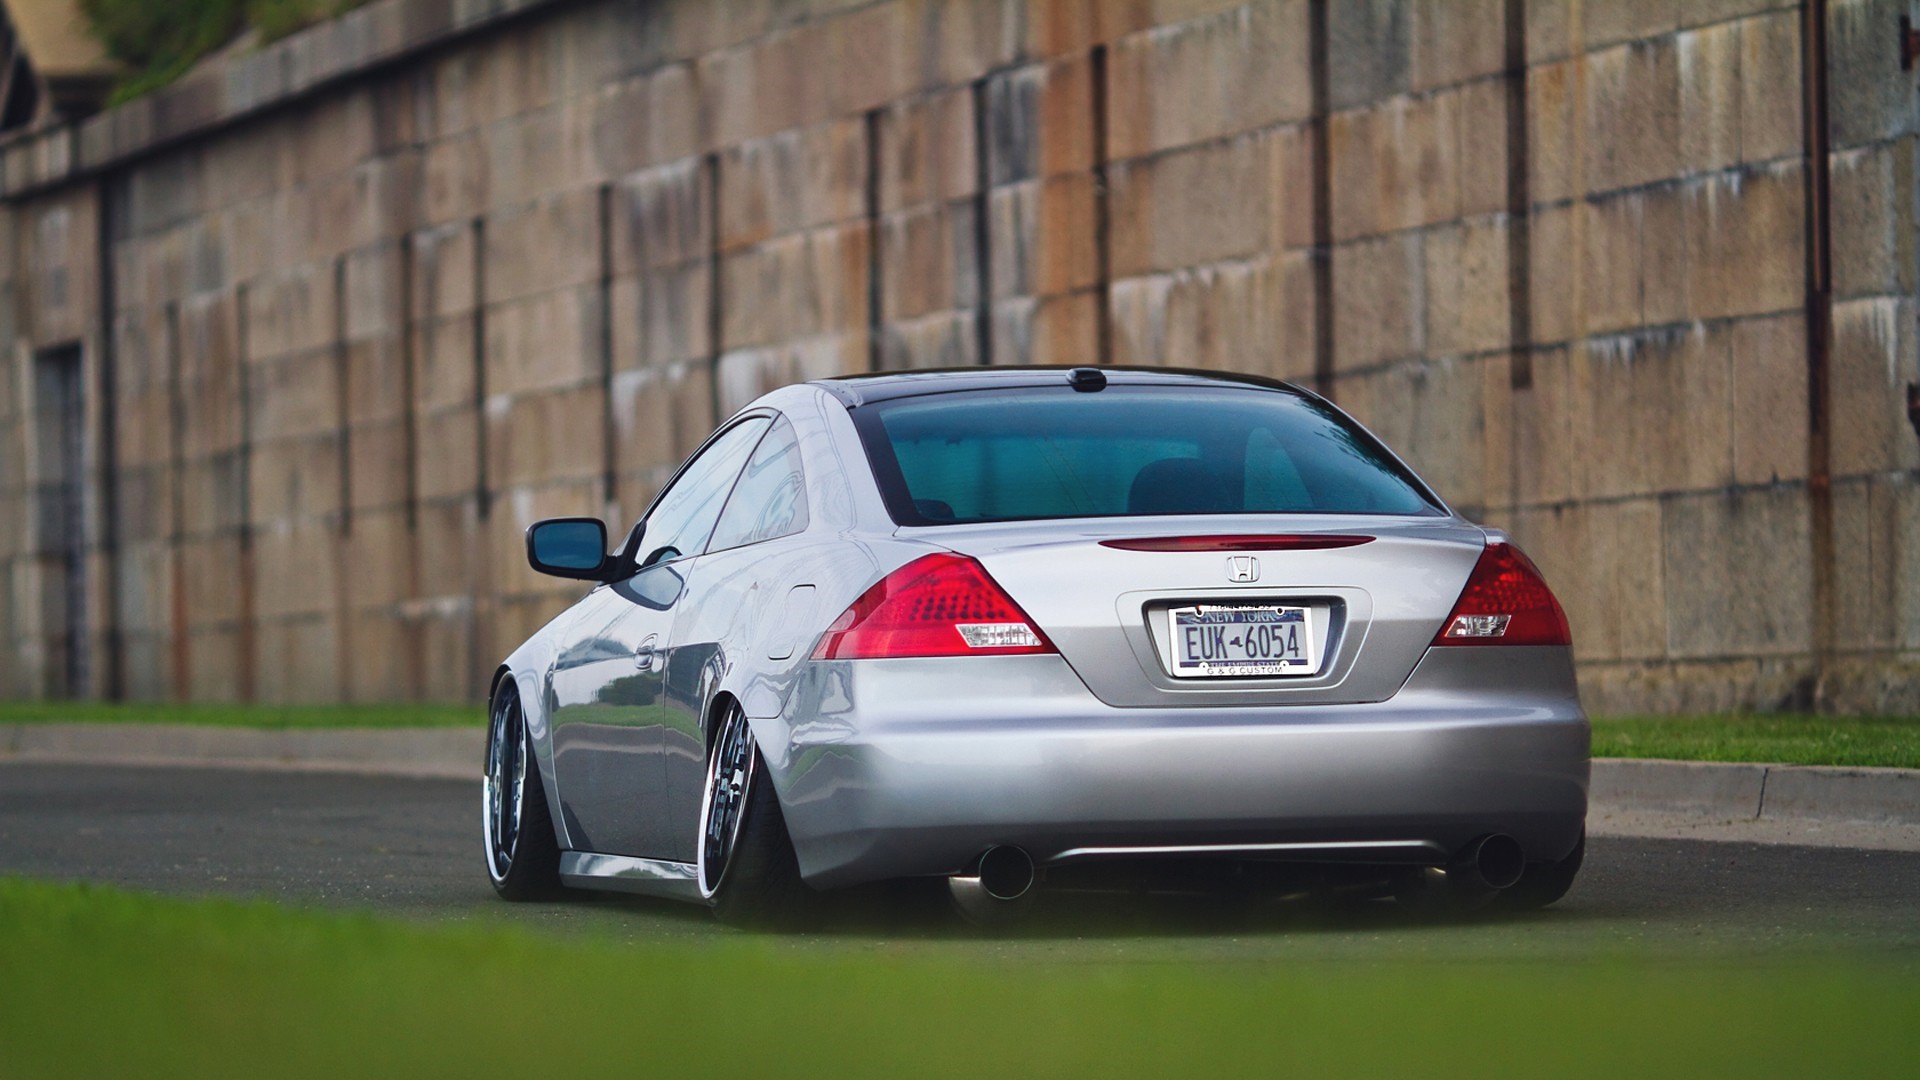 Acura Rl Wallpapers